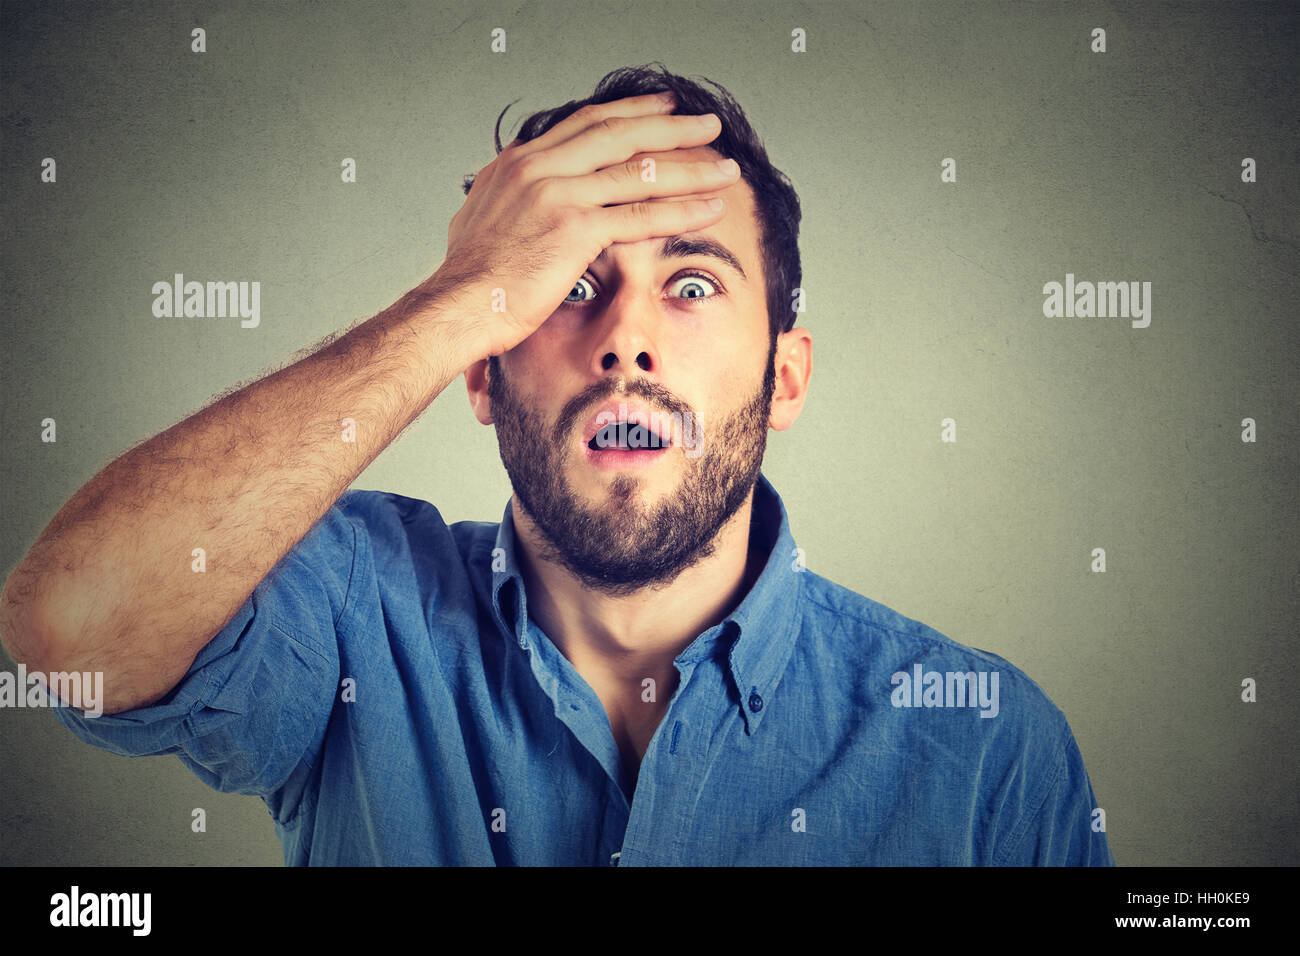 Portrait of young man with shocked facial expression Stock Photo